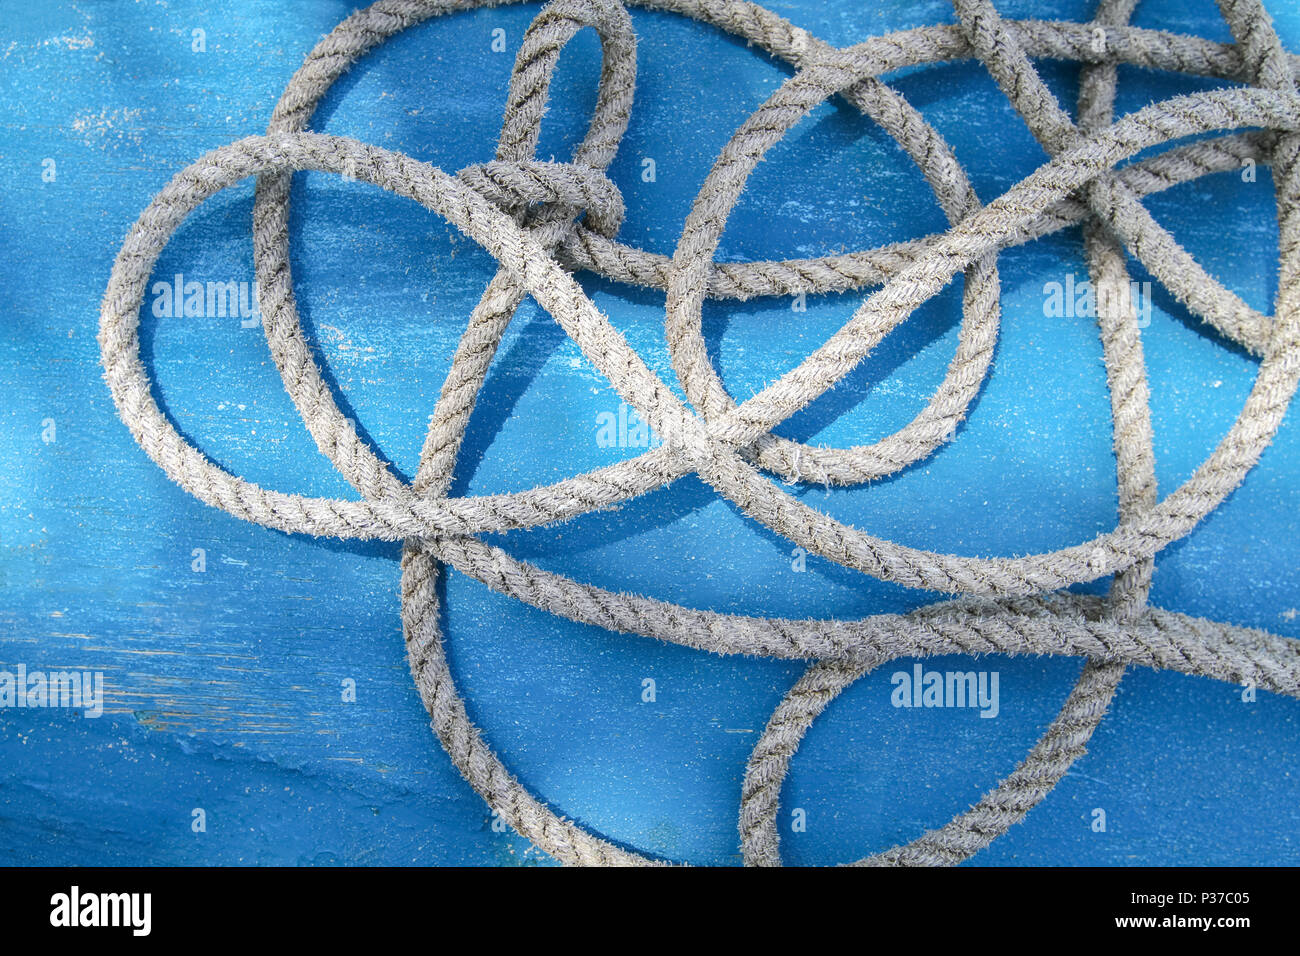 Rope on a deck of an old wooden boat, Boracay Island, Philippines. With space. Stock Photo